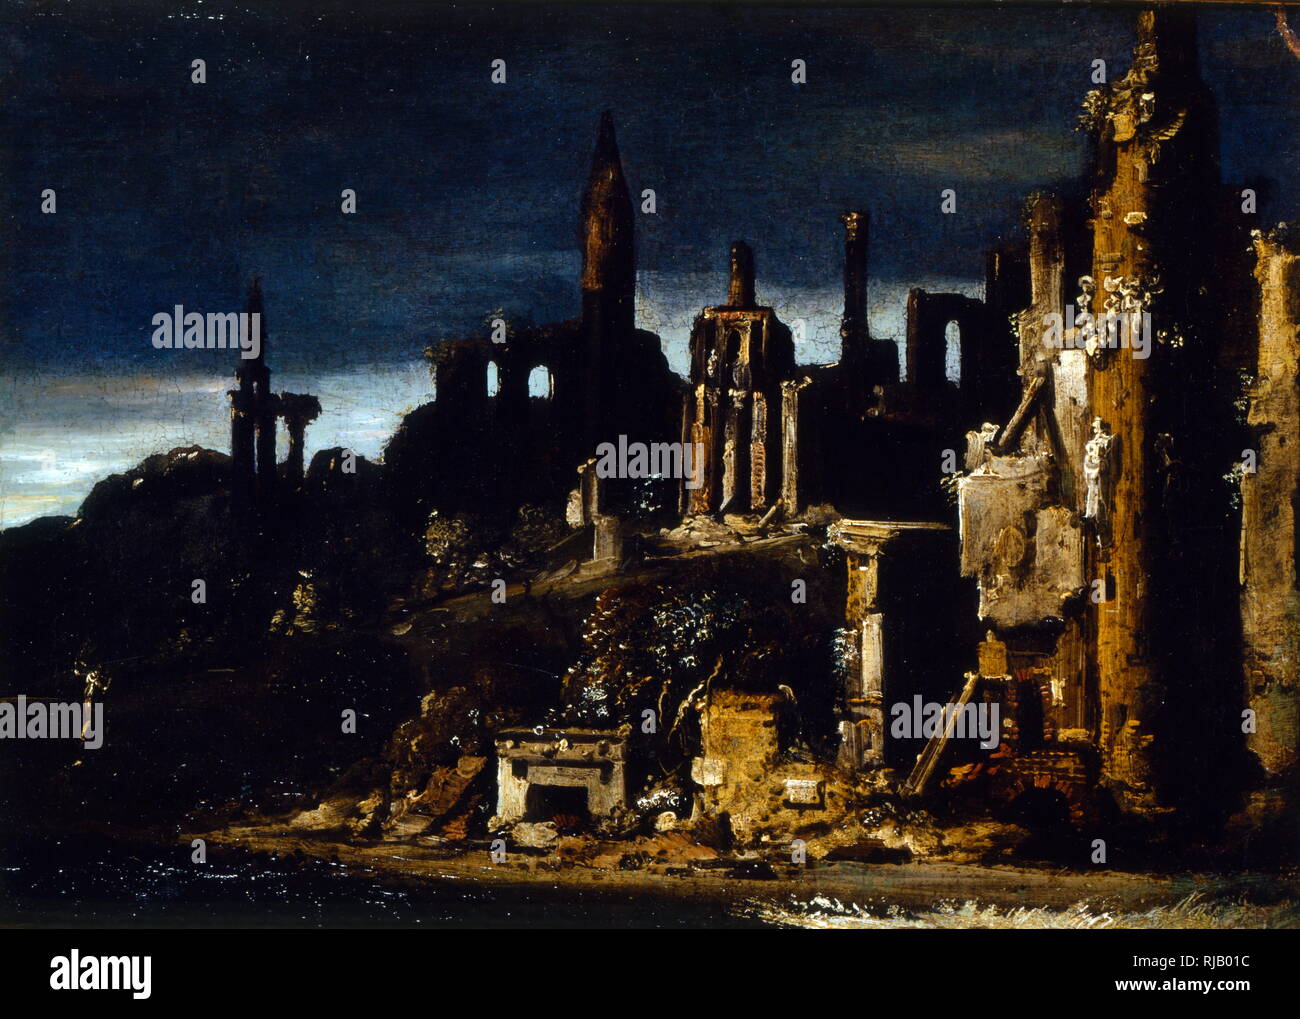 Town in ruins by Monsu Desiderio. 17th century. Monsu was the name formerly given to an artist believed to have painted architectural scenes in a distinctive style in Naples in the early seventeenth century. art historians identified the works previously attributed to 'Desiderio' as being by at least three different painters: Francois de Nome (1593 – after 1620) and Didier Barra, both originally from Metz, and a third artist, whose name is unknown. Stock Photo